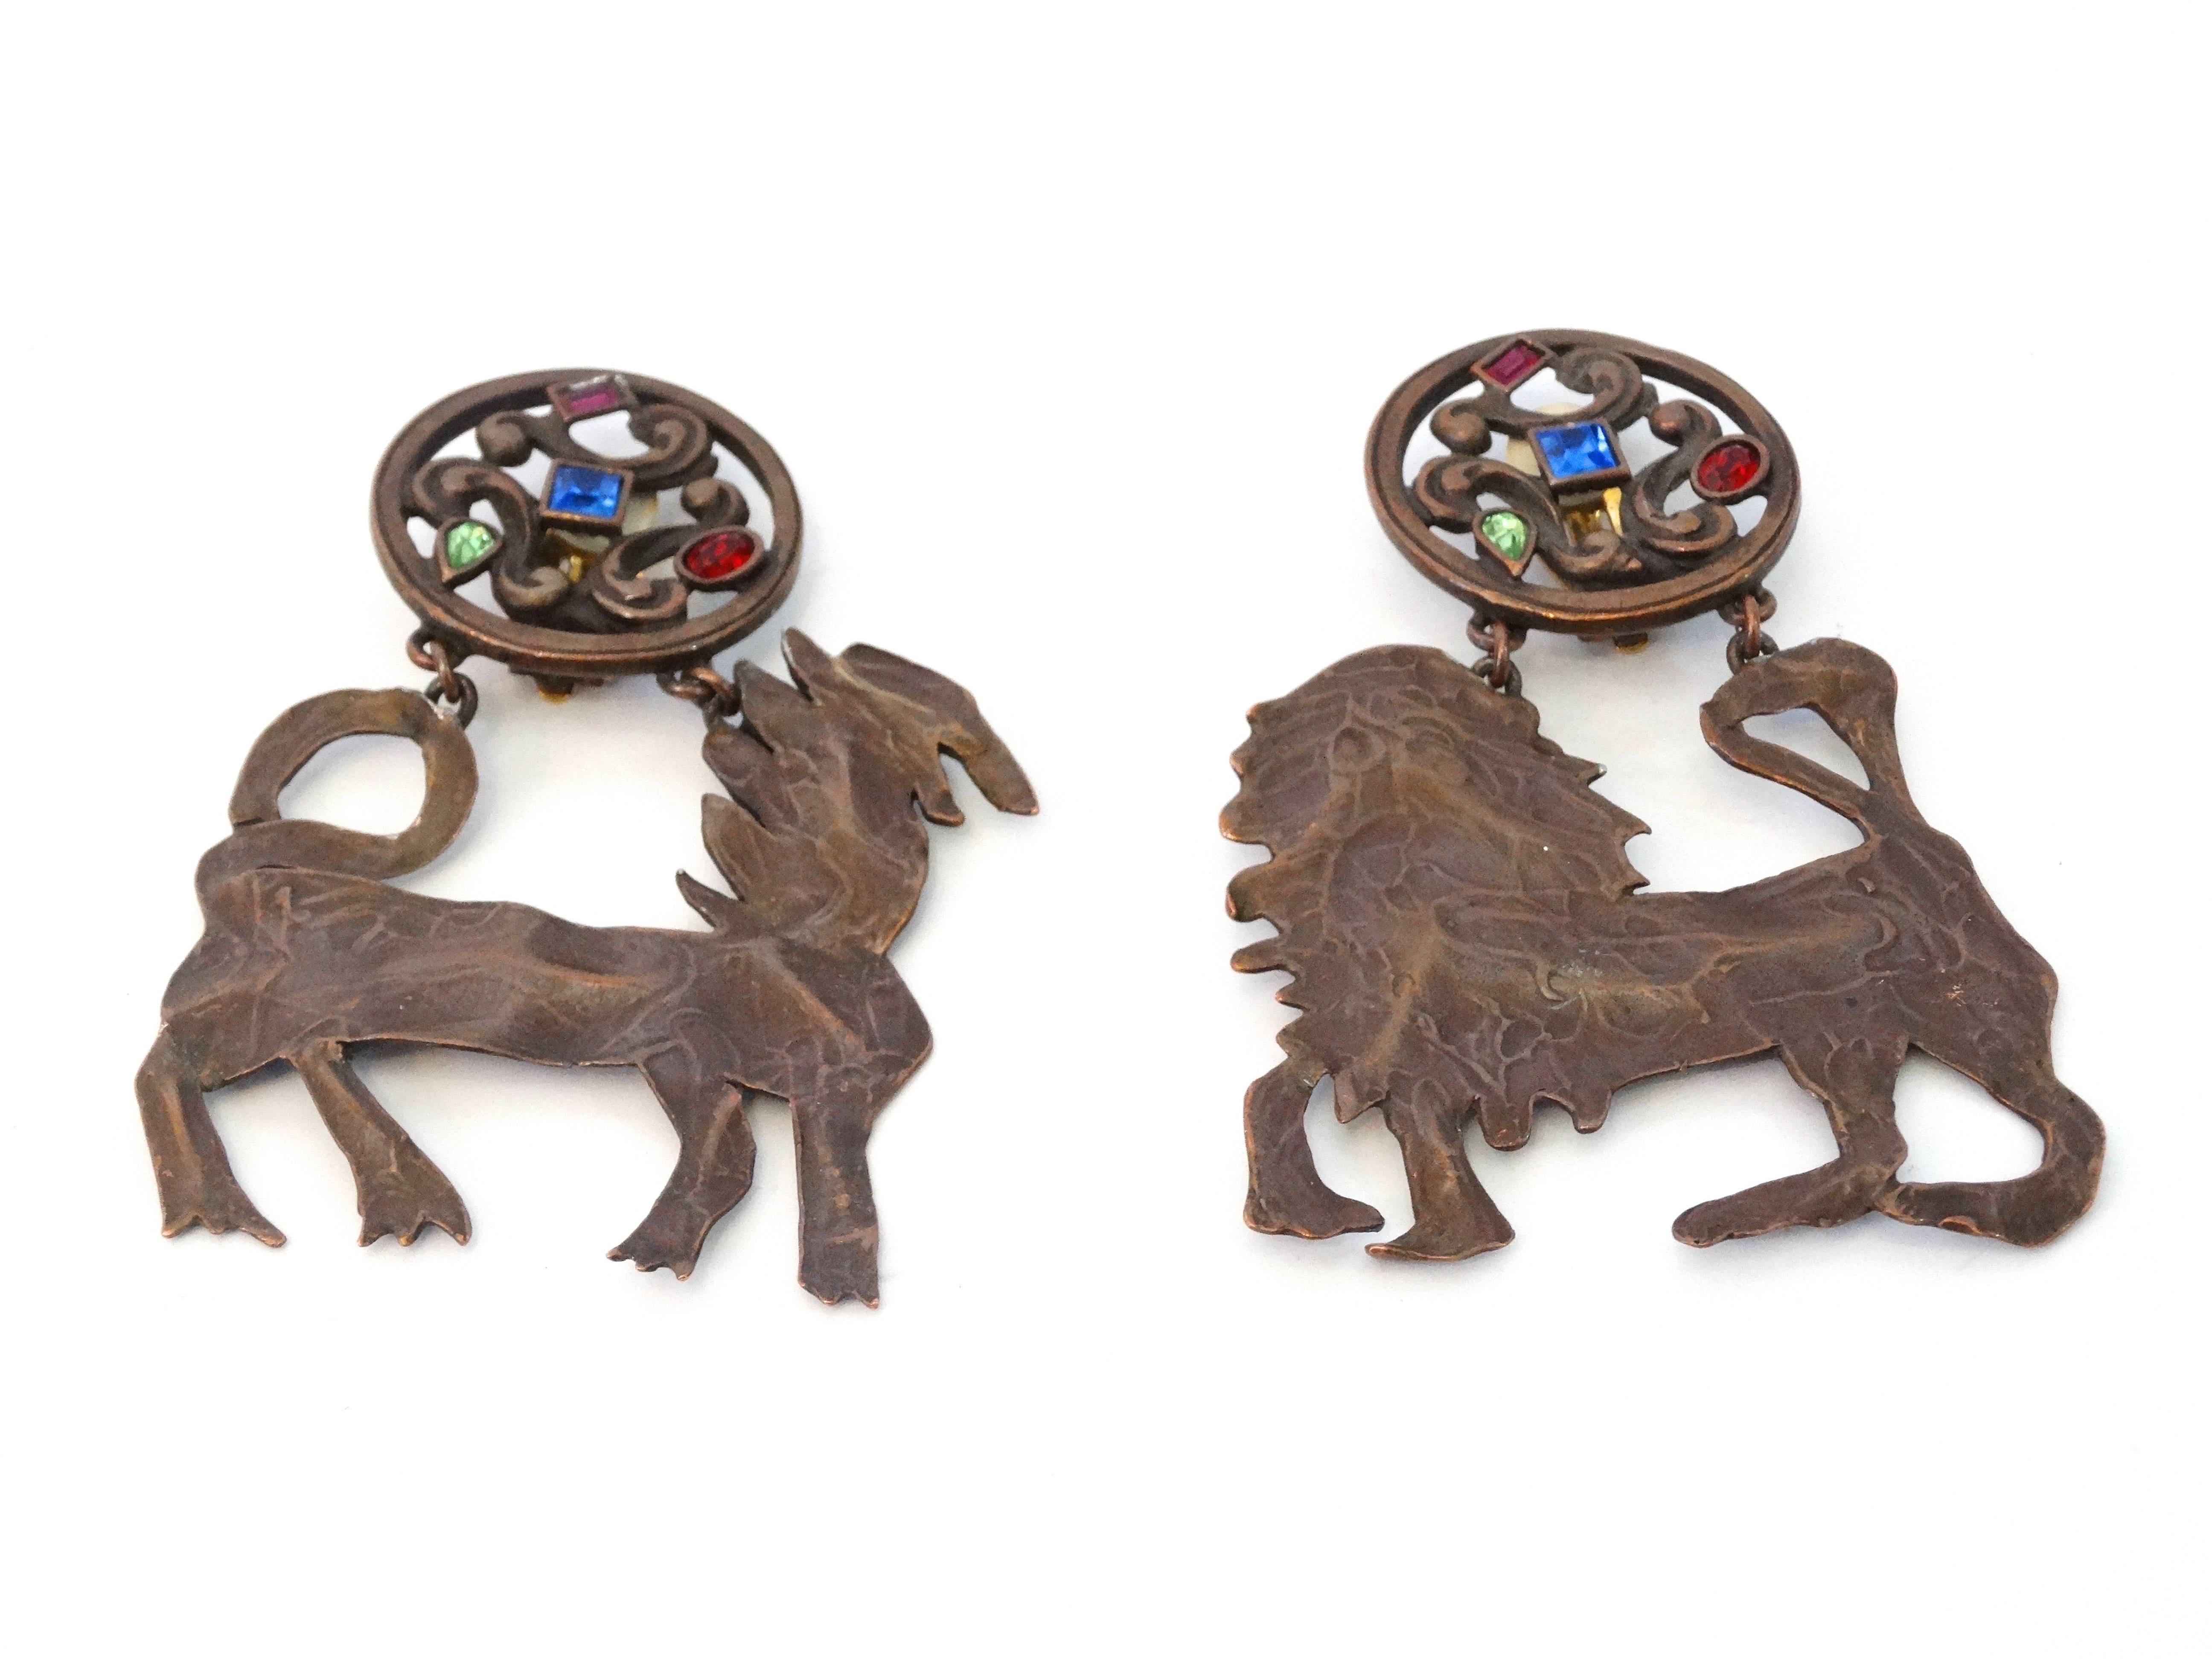 Highly collectible 1970's Yves Saint Laurent rive gauche  animal sculpture clip earrings with colored crystal stones , I see a lion and horse when I look at these beauties. Large in scale signed on both earrings. 3.5 inches long by 2.5 inches wide. 